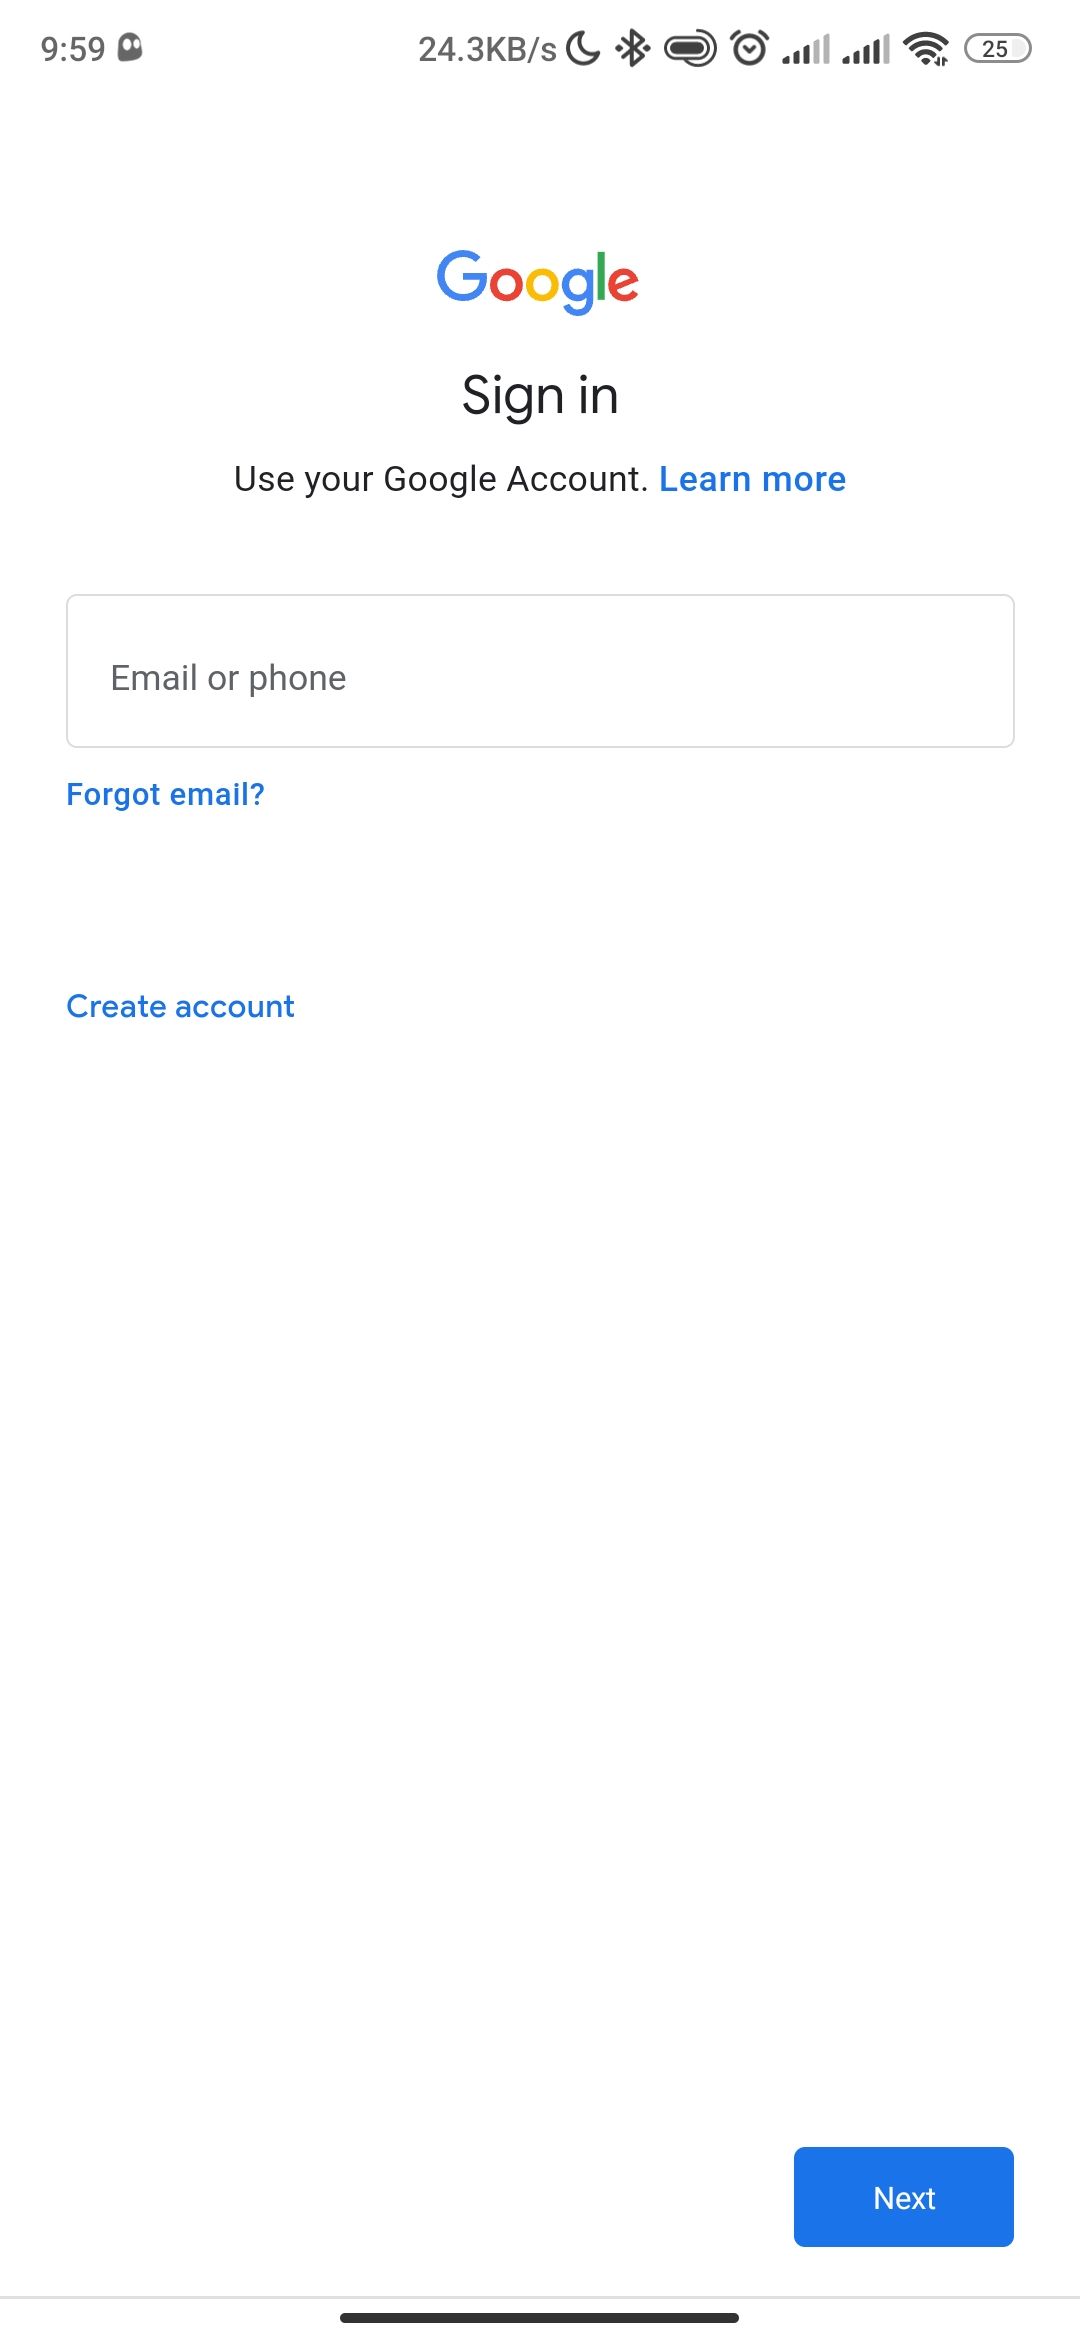 Sign in page on Gmail Android